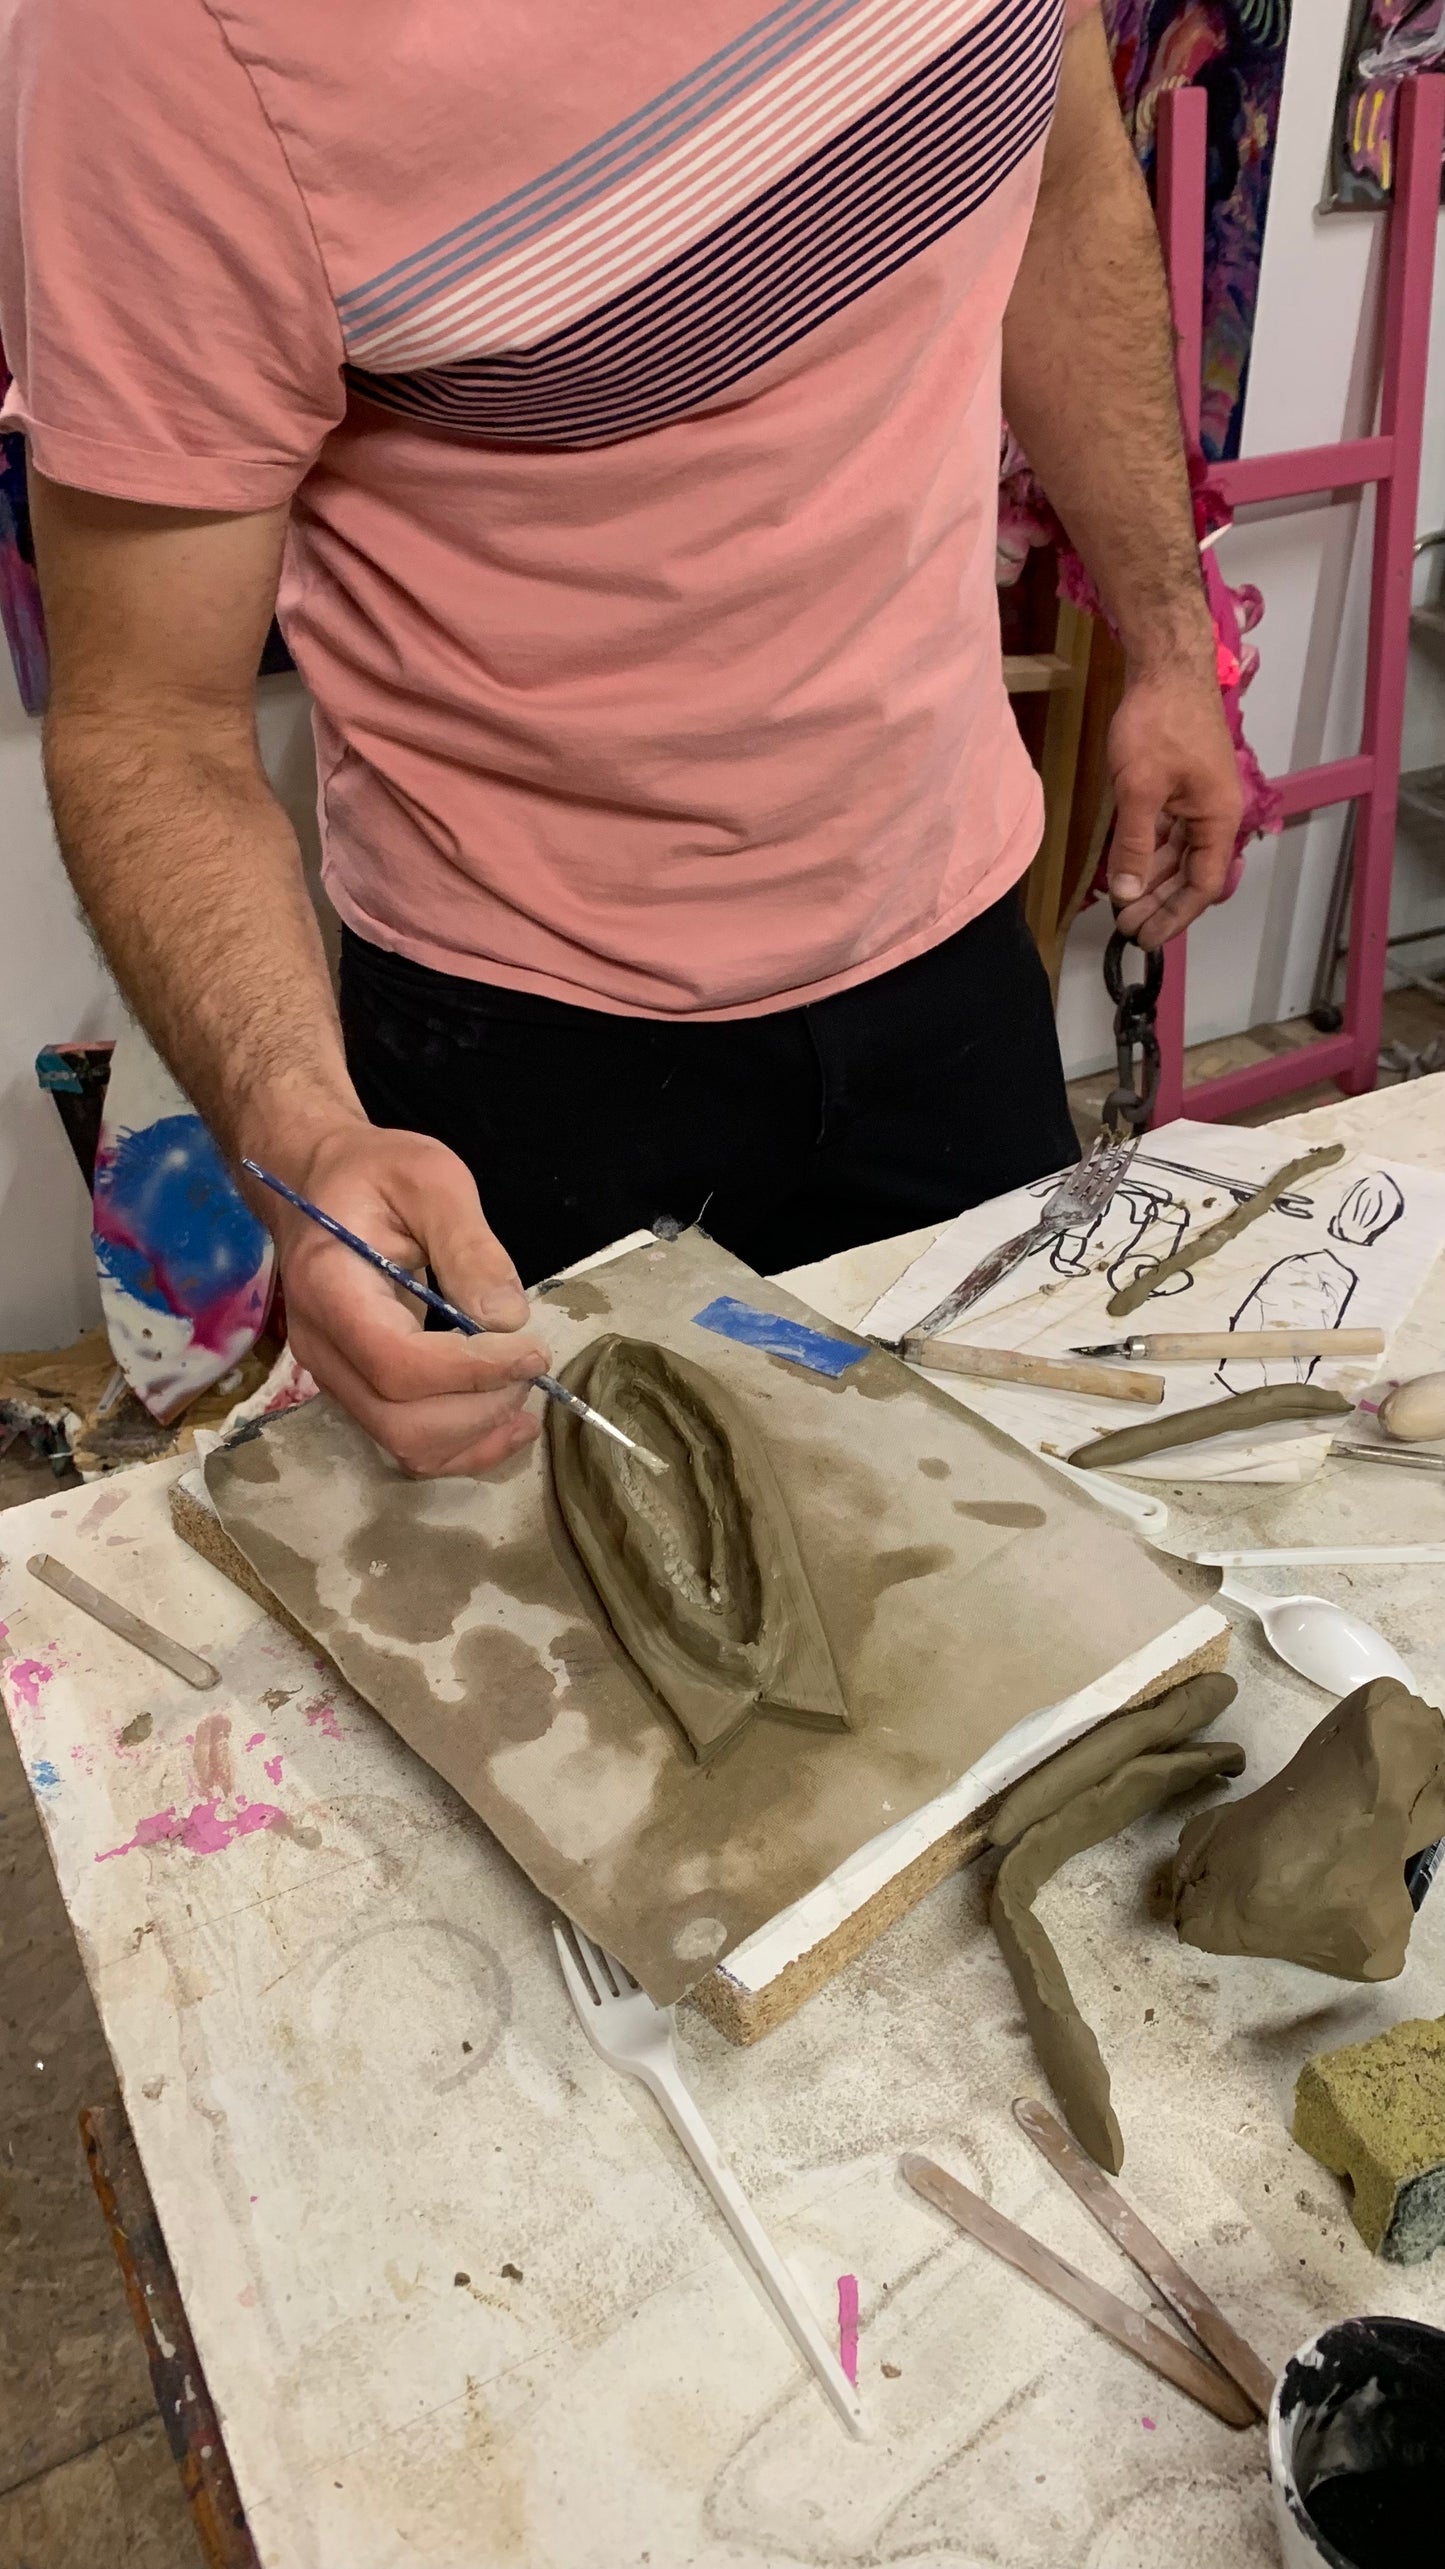 Ceramica Erotica Workshop with Lizzie in Lisbon, Portugal by subcultours